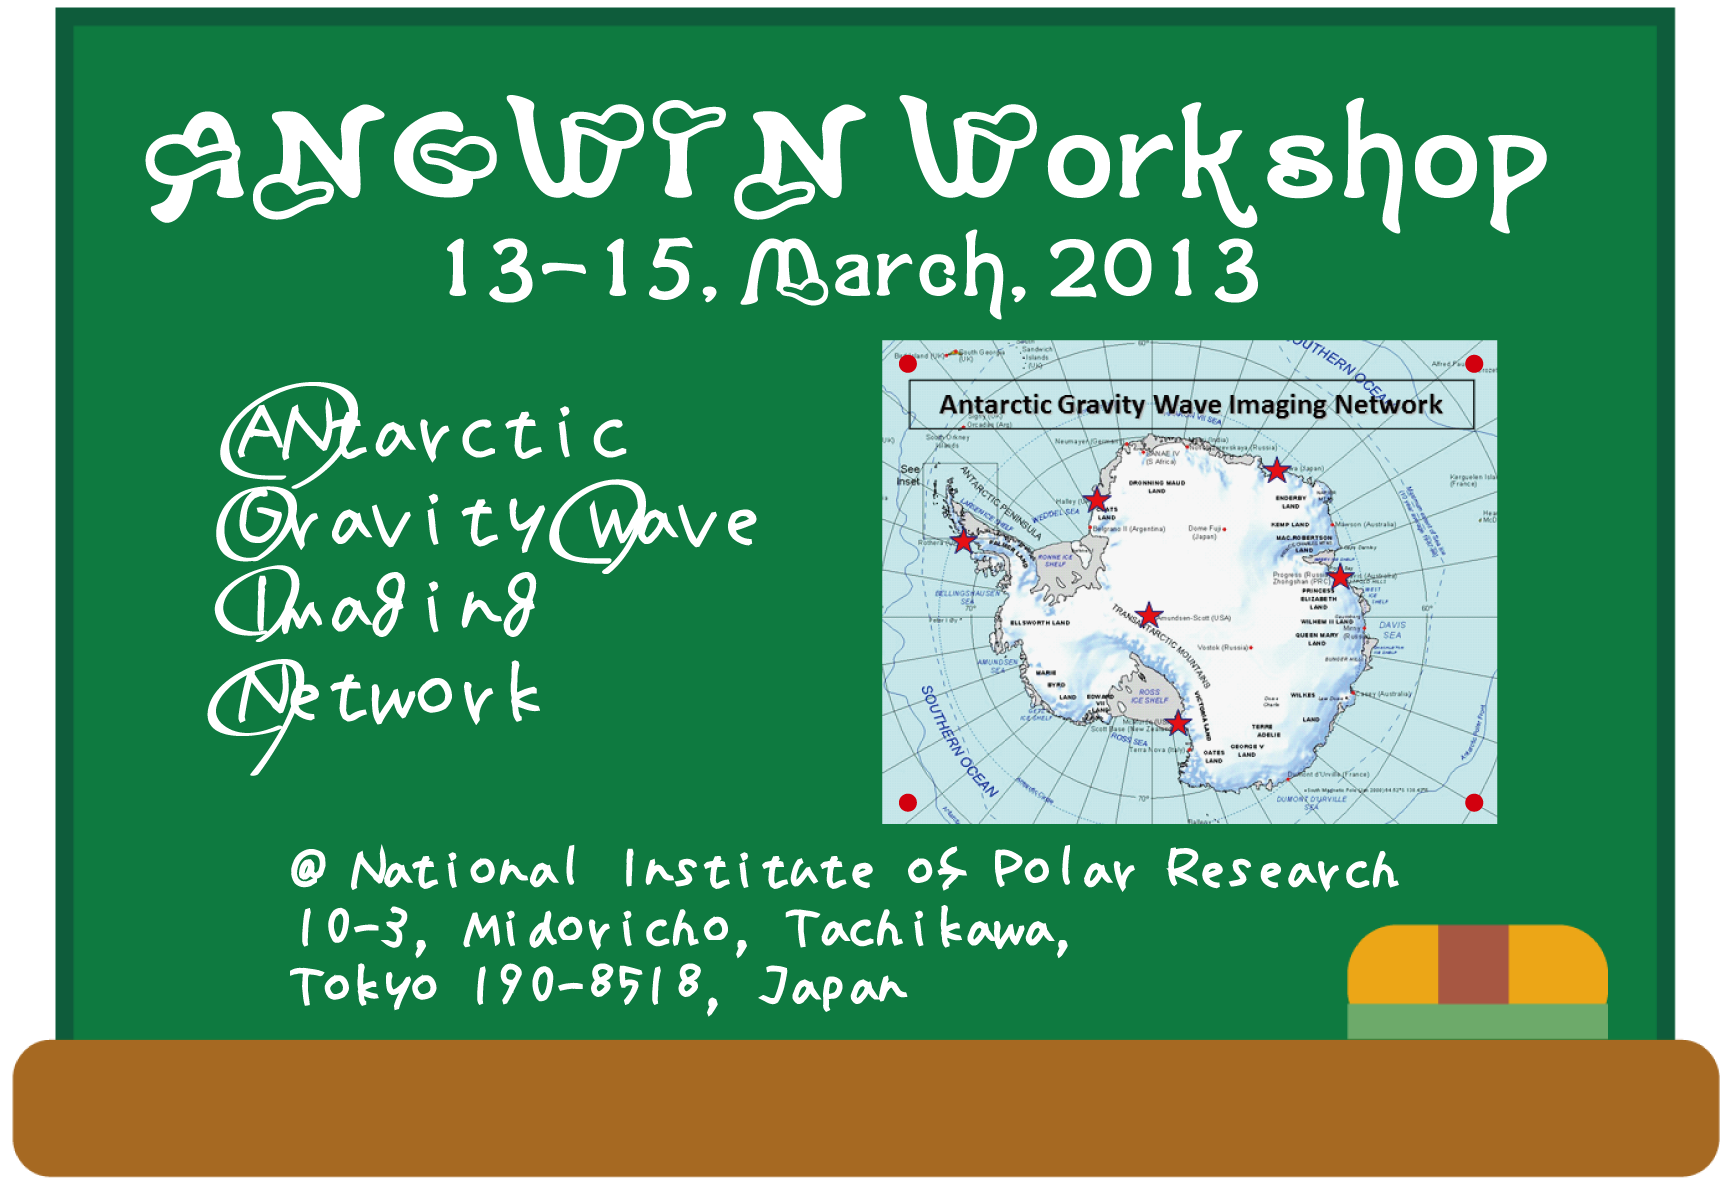 ANGWIN workshop